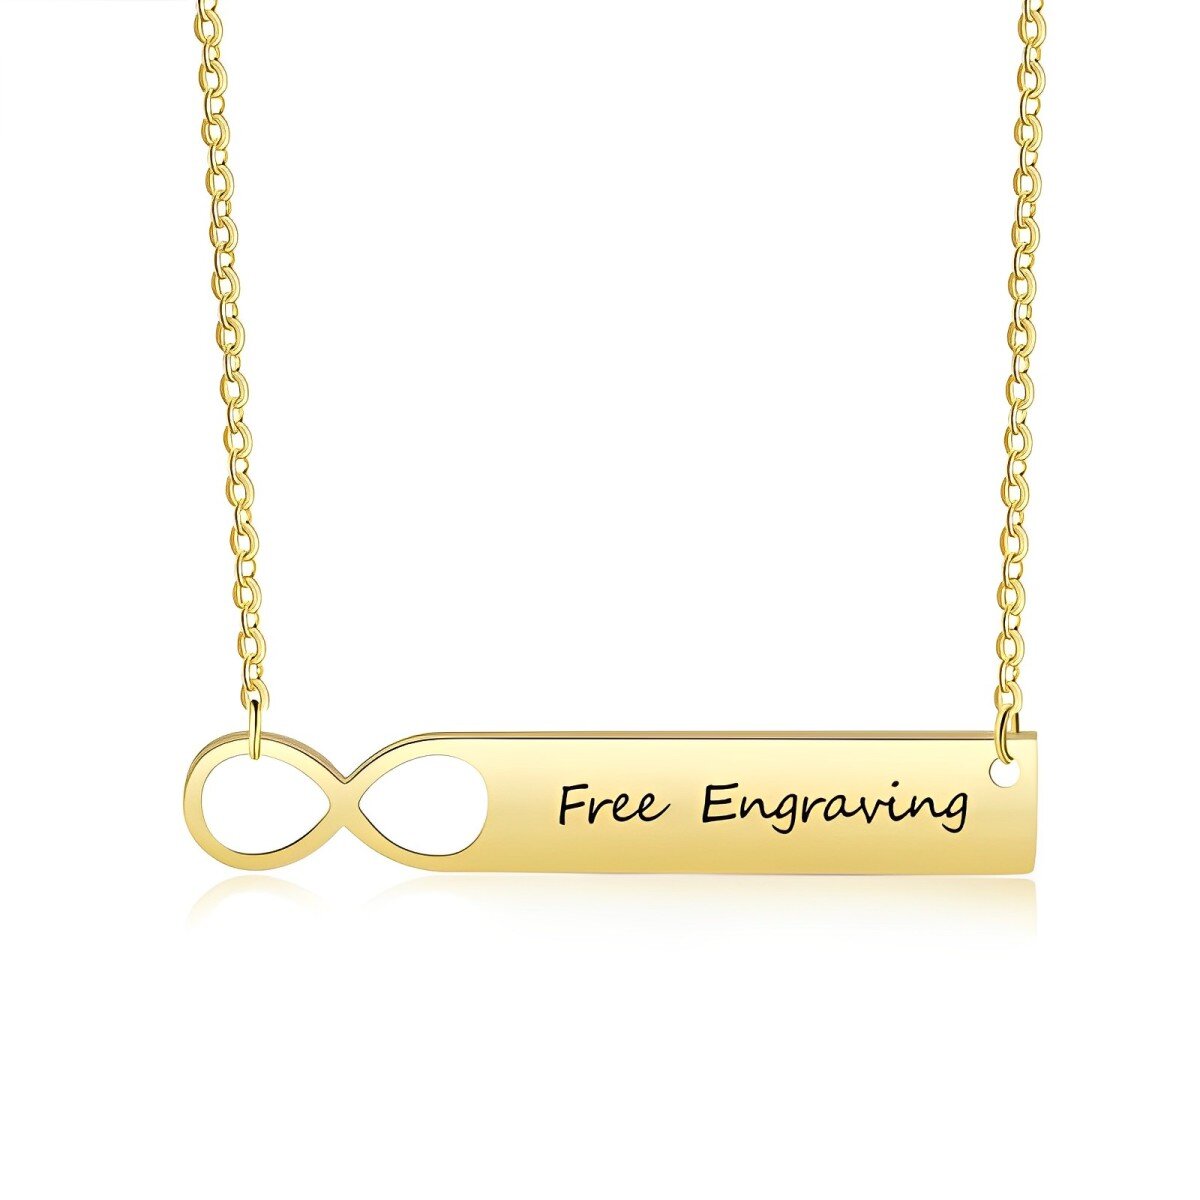 14K Gold Personalized Engraving & Infinity Symbol Bar Necklace-6